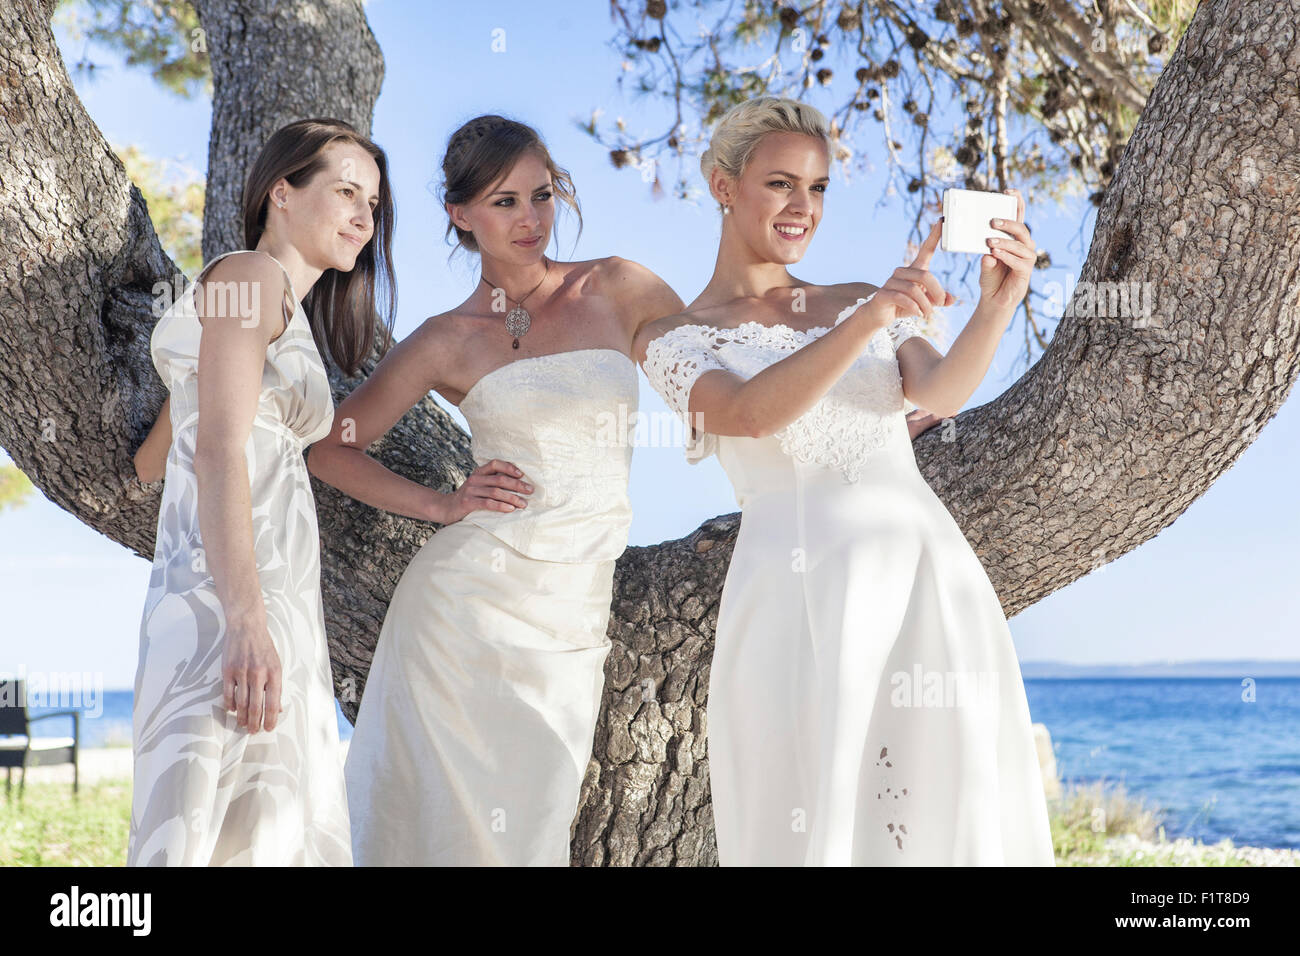 Bride and bridesmaids taking photo of themselves Stock Photo